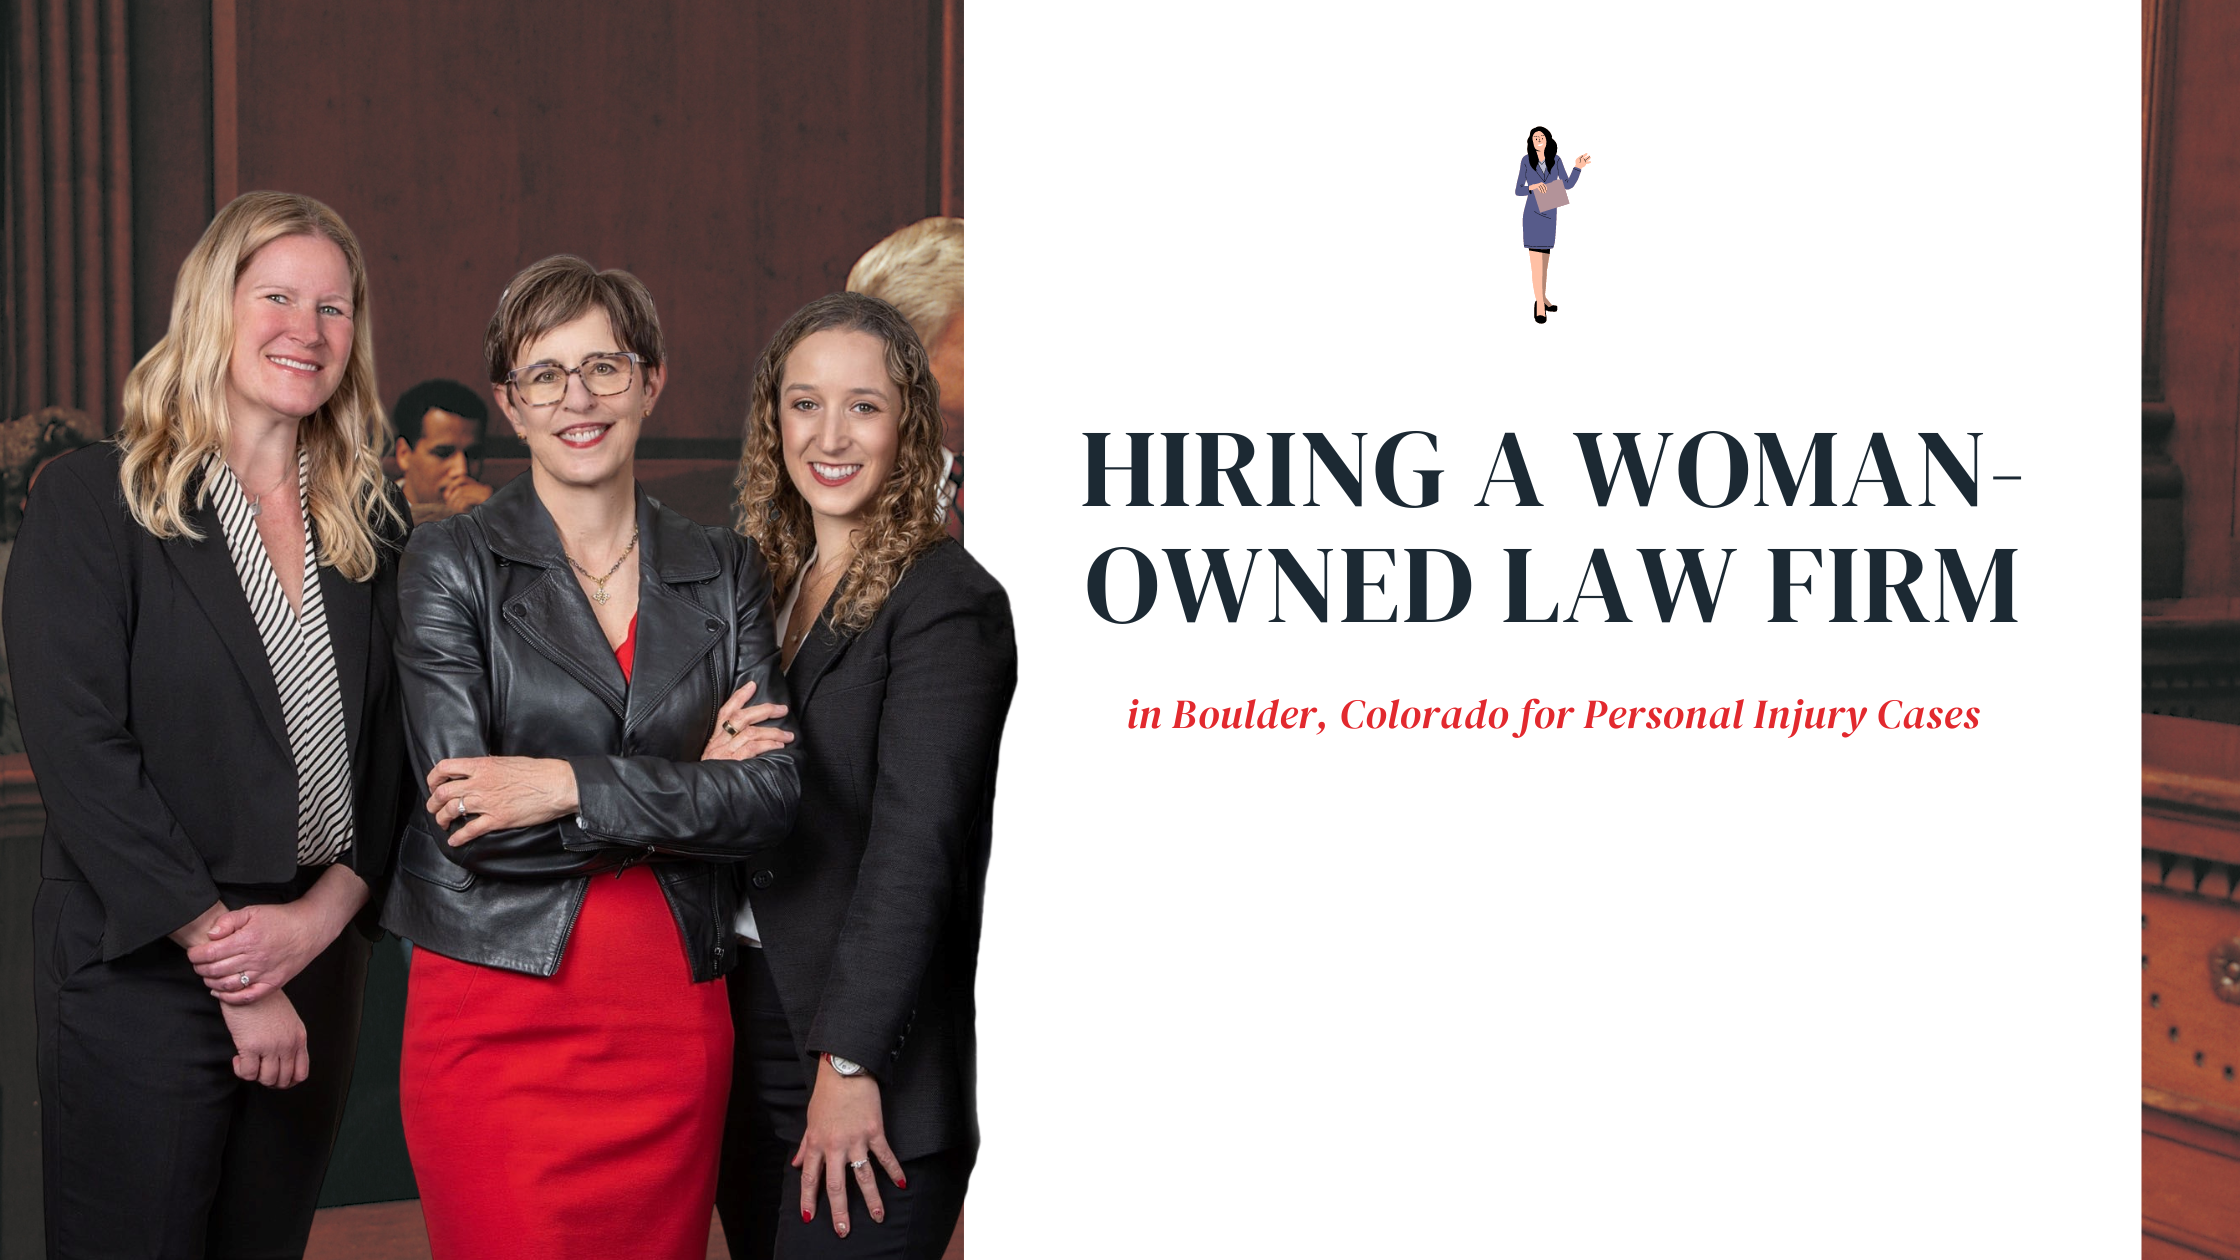 Hiring a Woman-Owned Law Firm in Boulder, Colorado for Personal Injury Cases